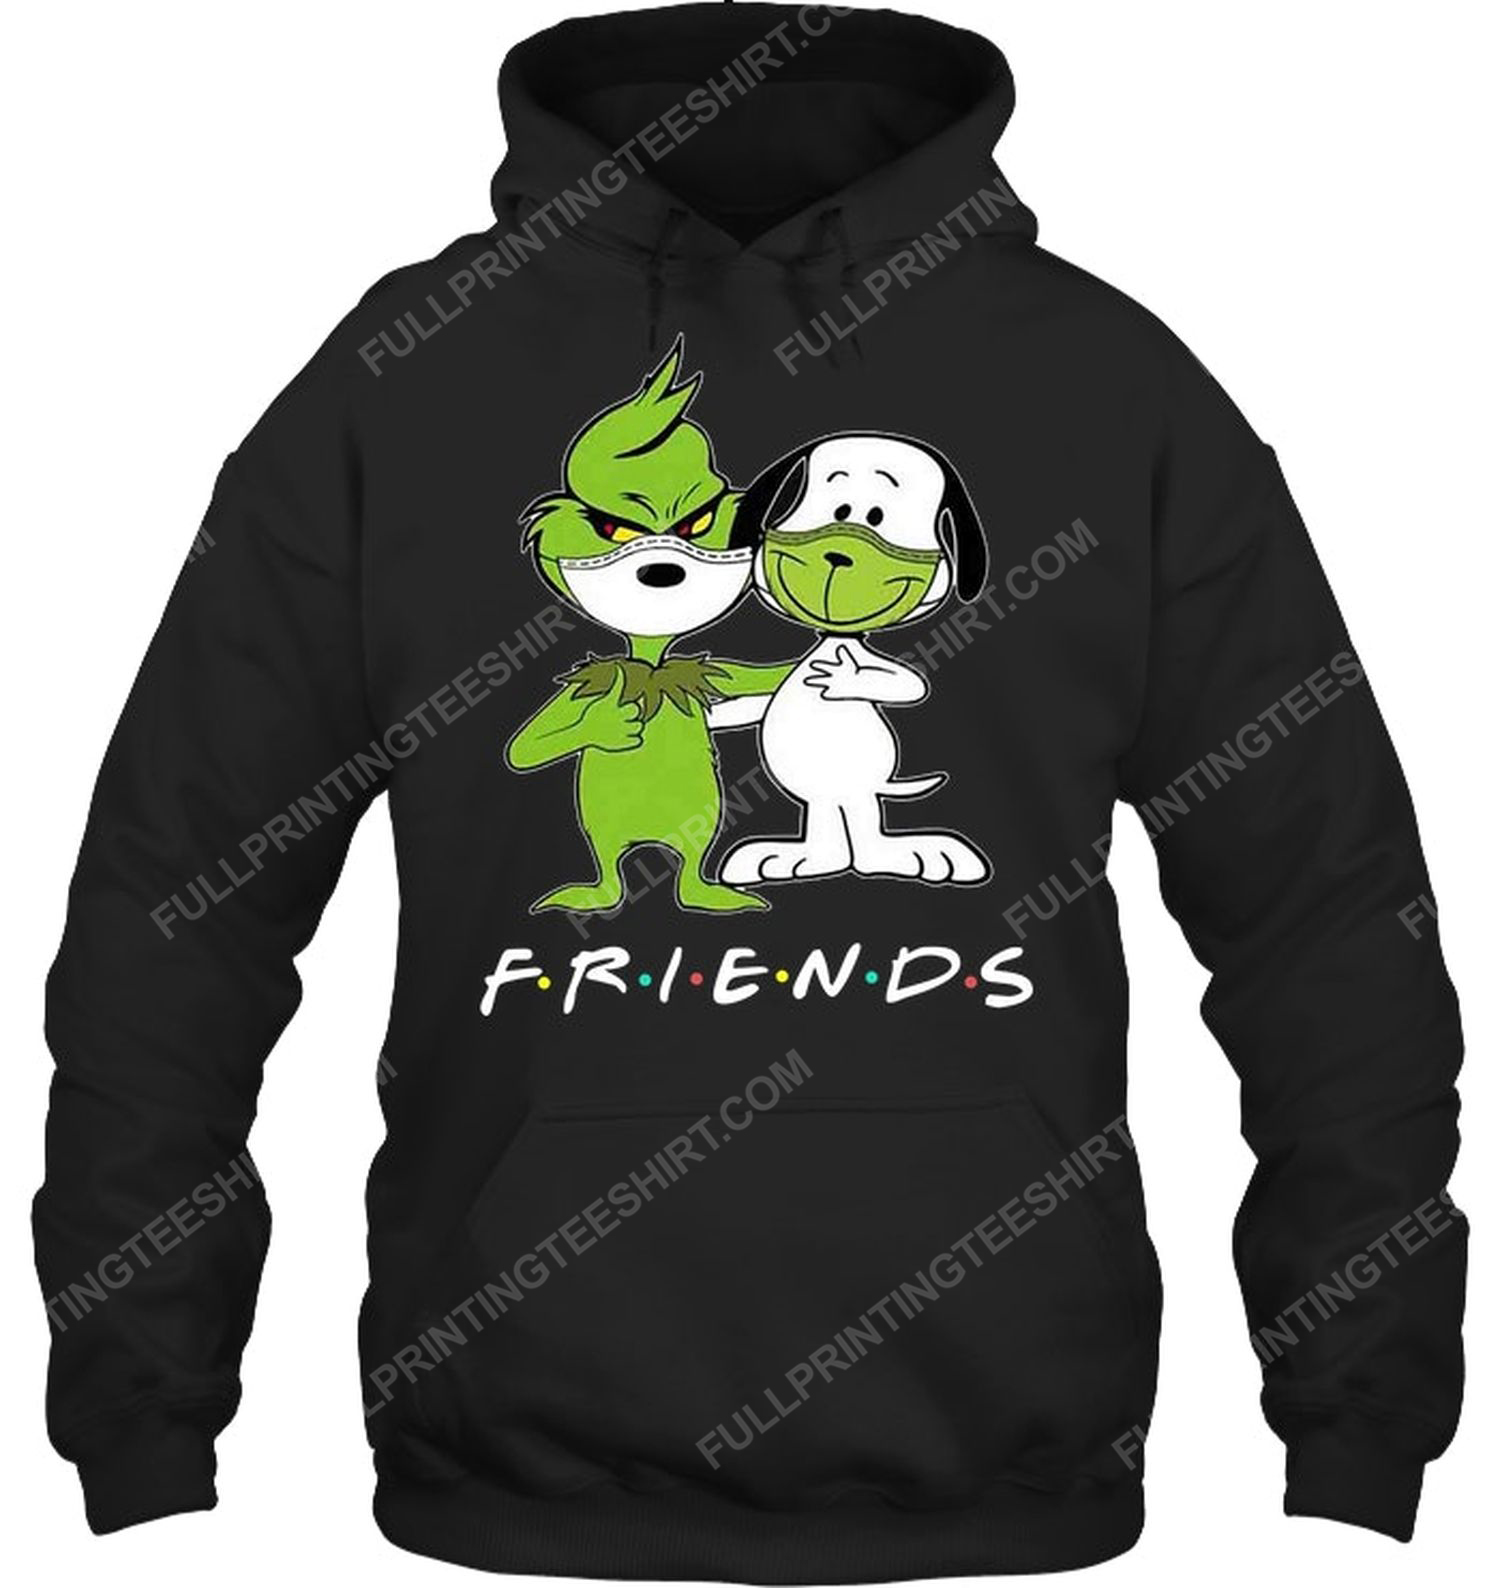 The grinch and snoopy friends tv show hoodie